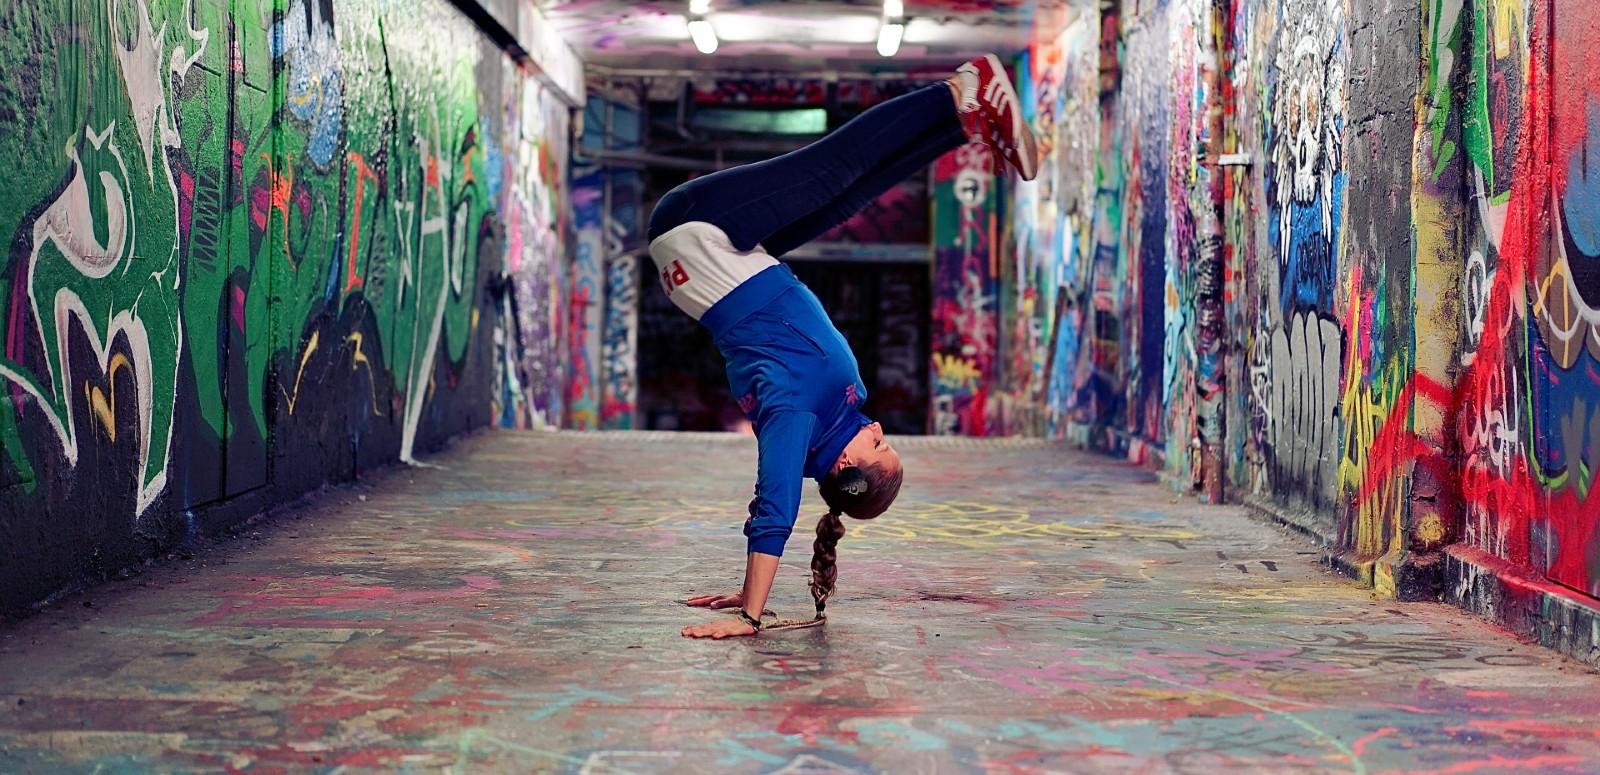 A woman standing on her hands, hip-hop dancing, in a graffitied tunnel